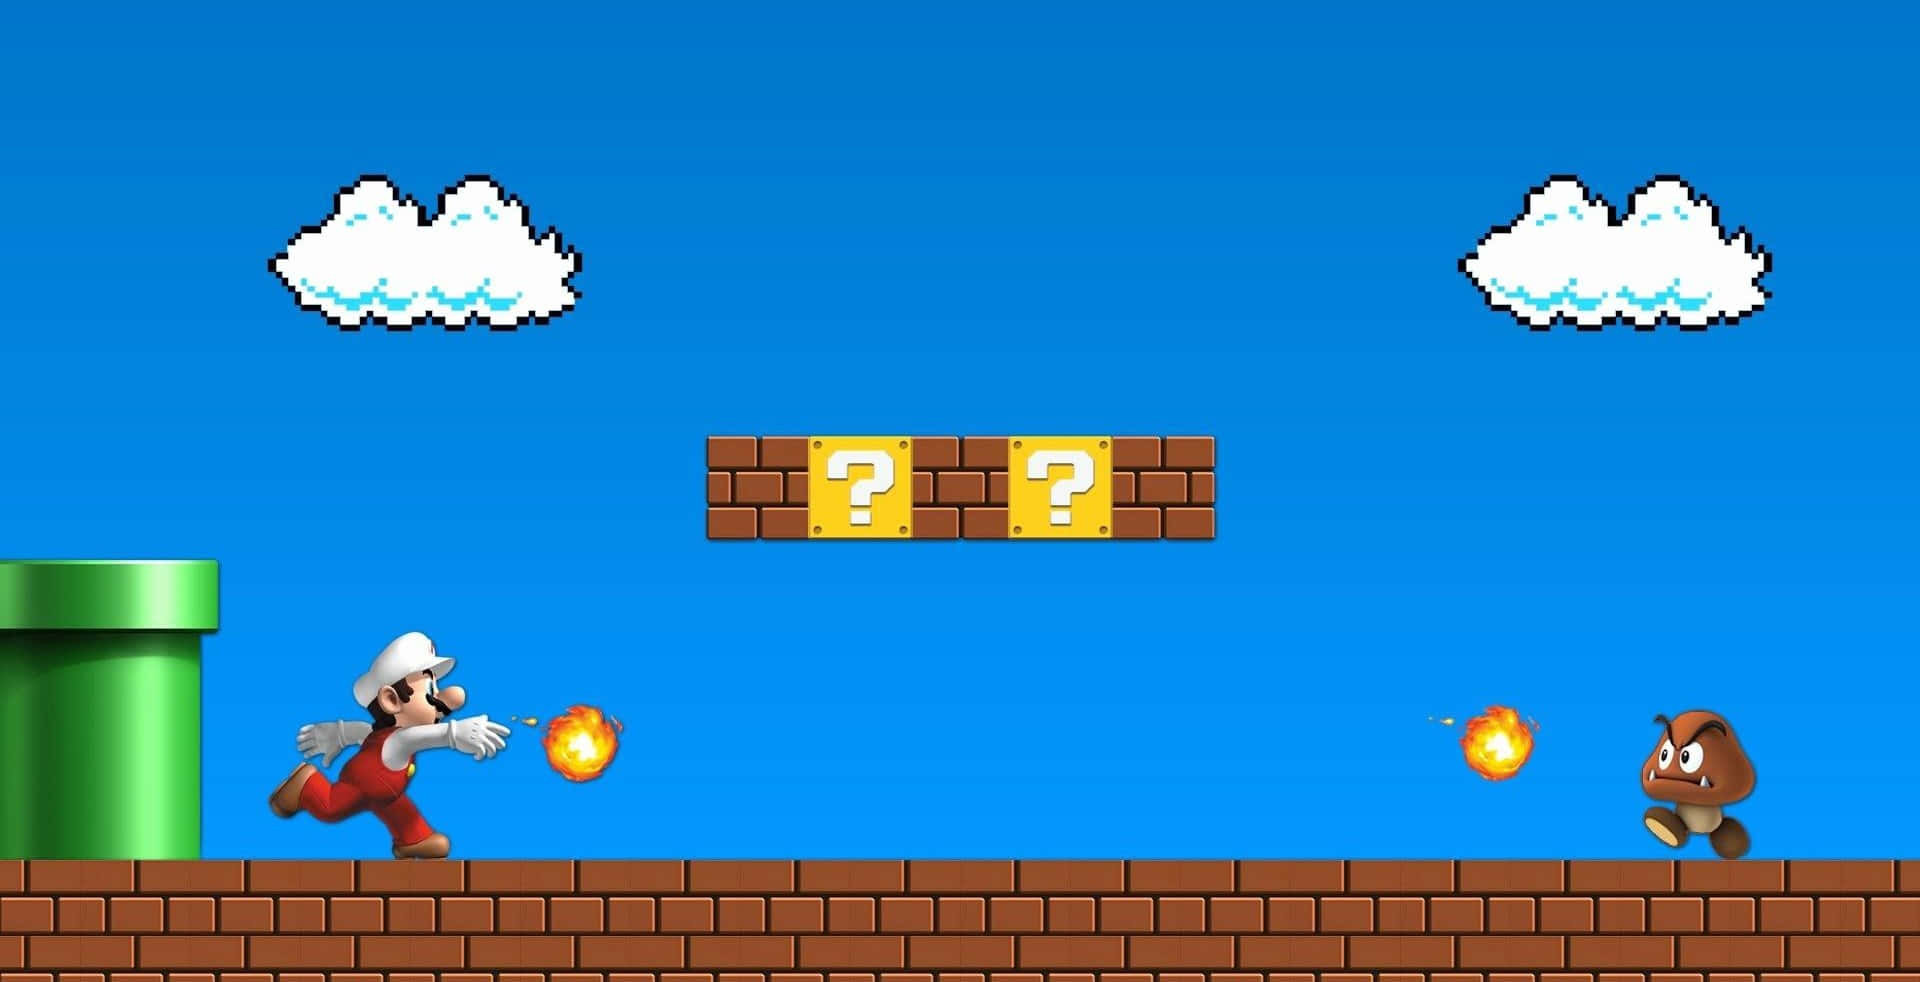 1.  A classic cartoon character, Super Mario, taking a jump for victory